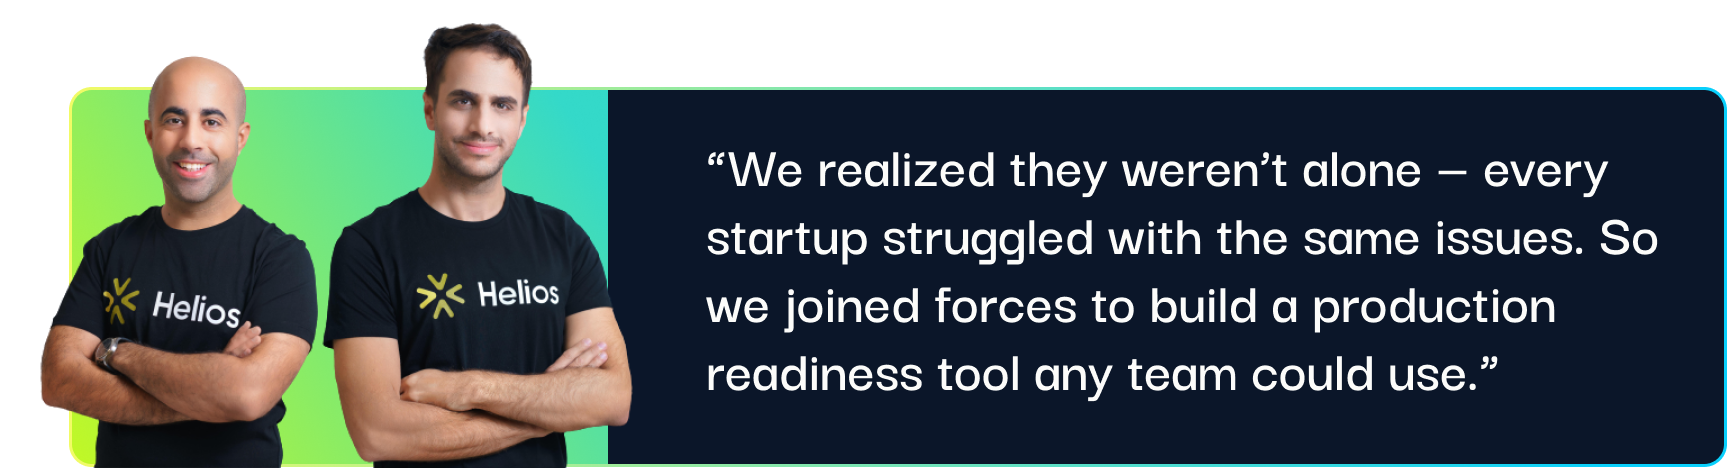 "We realized they weren't alone - every startup struggled with the same issues. So we joined forces to build a production readiness tool any team could use."